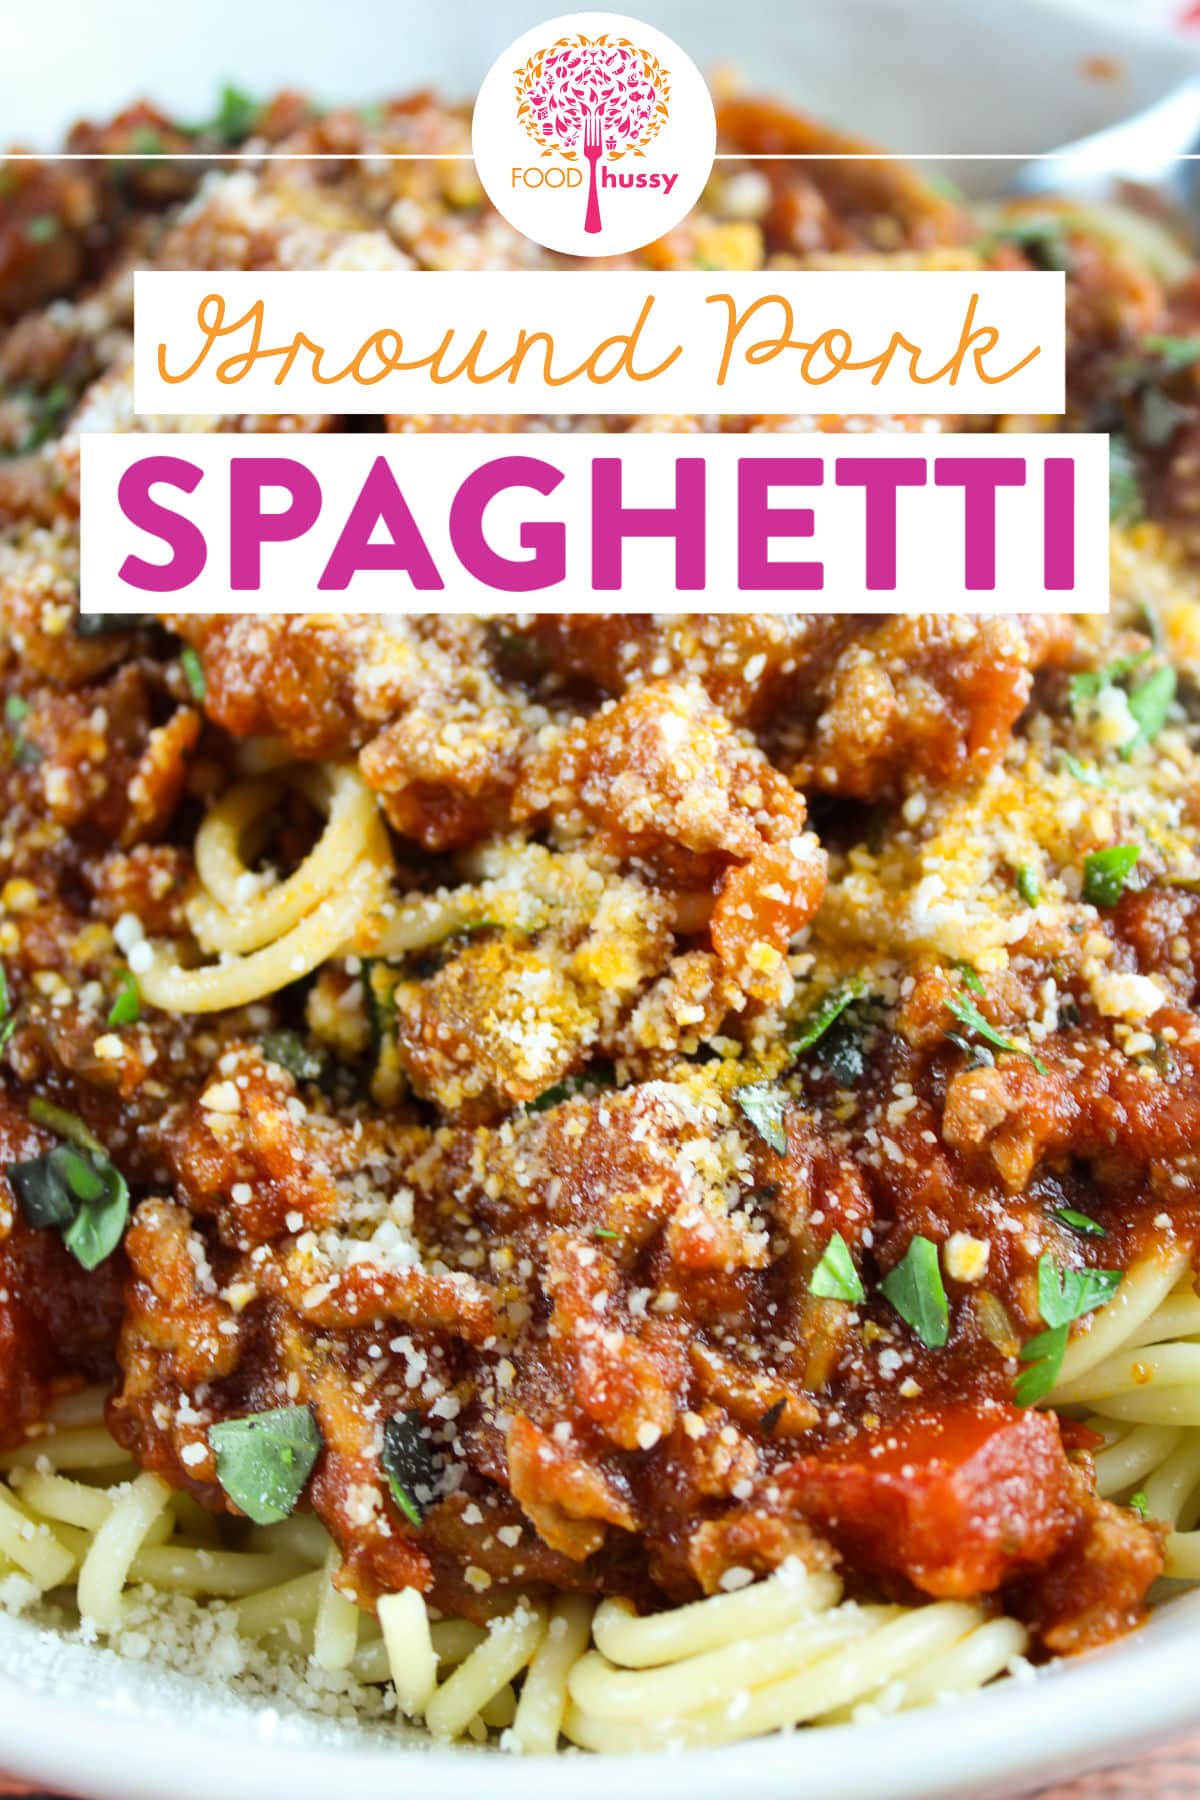 This Ground Pork Spaghetti will remind you of a rich bolognese sauce at a fancy Italian restaurant - but you'll know you made it at home and it's easy!!! Full of chunky veggies, affordable ground pork and delicious San Marzano tomatoes! via @foodhussy